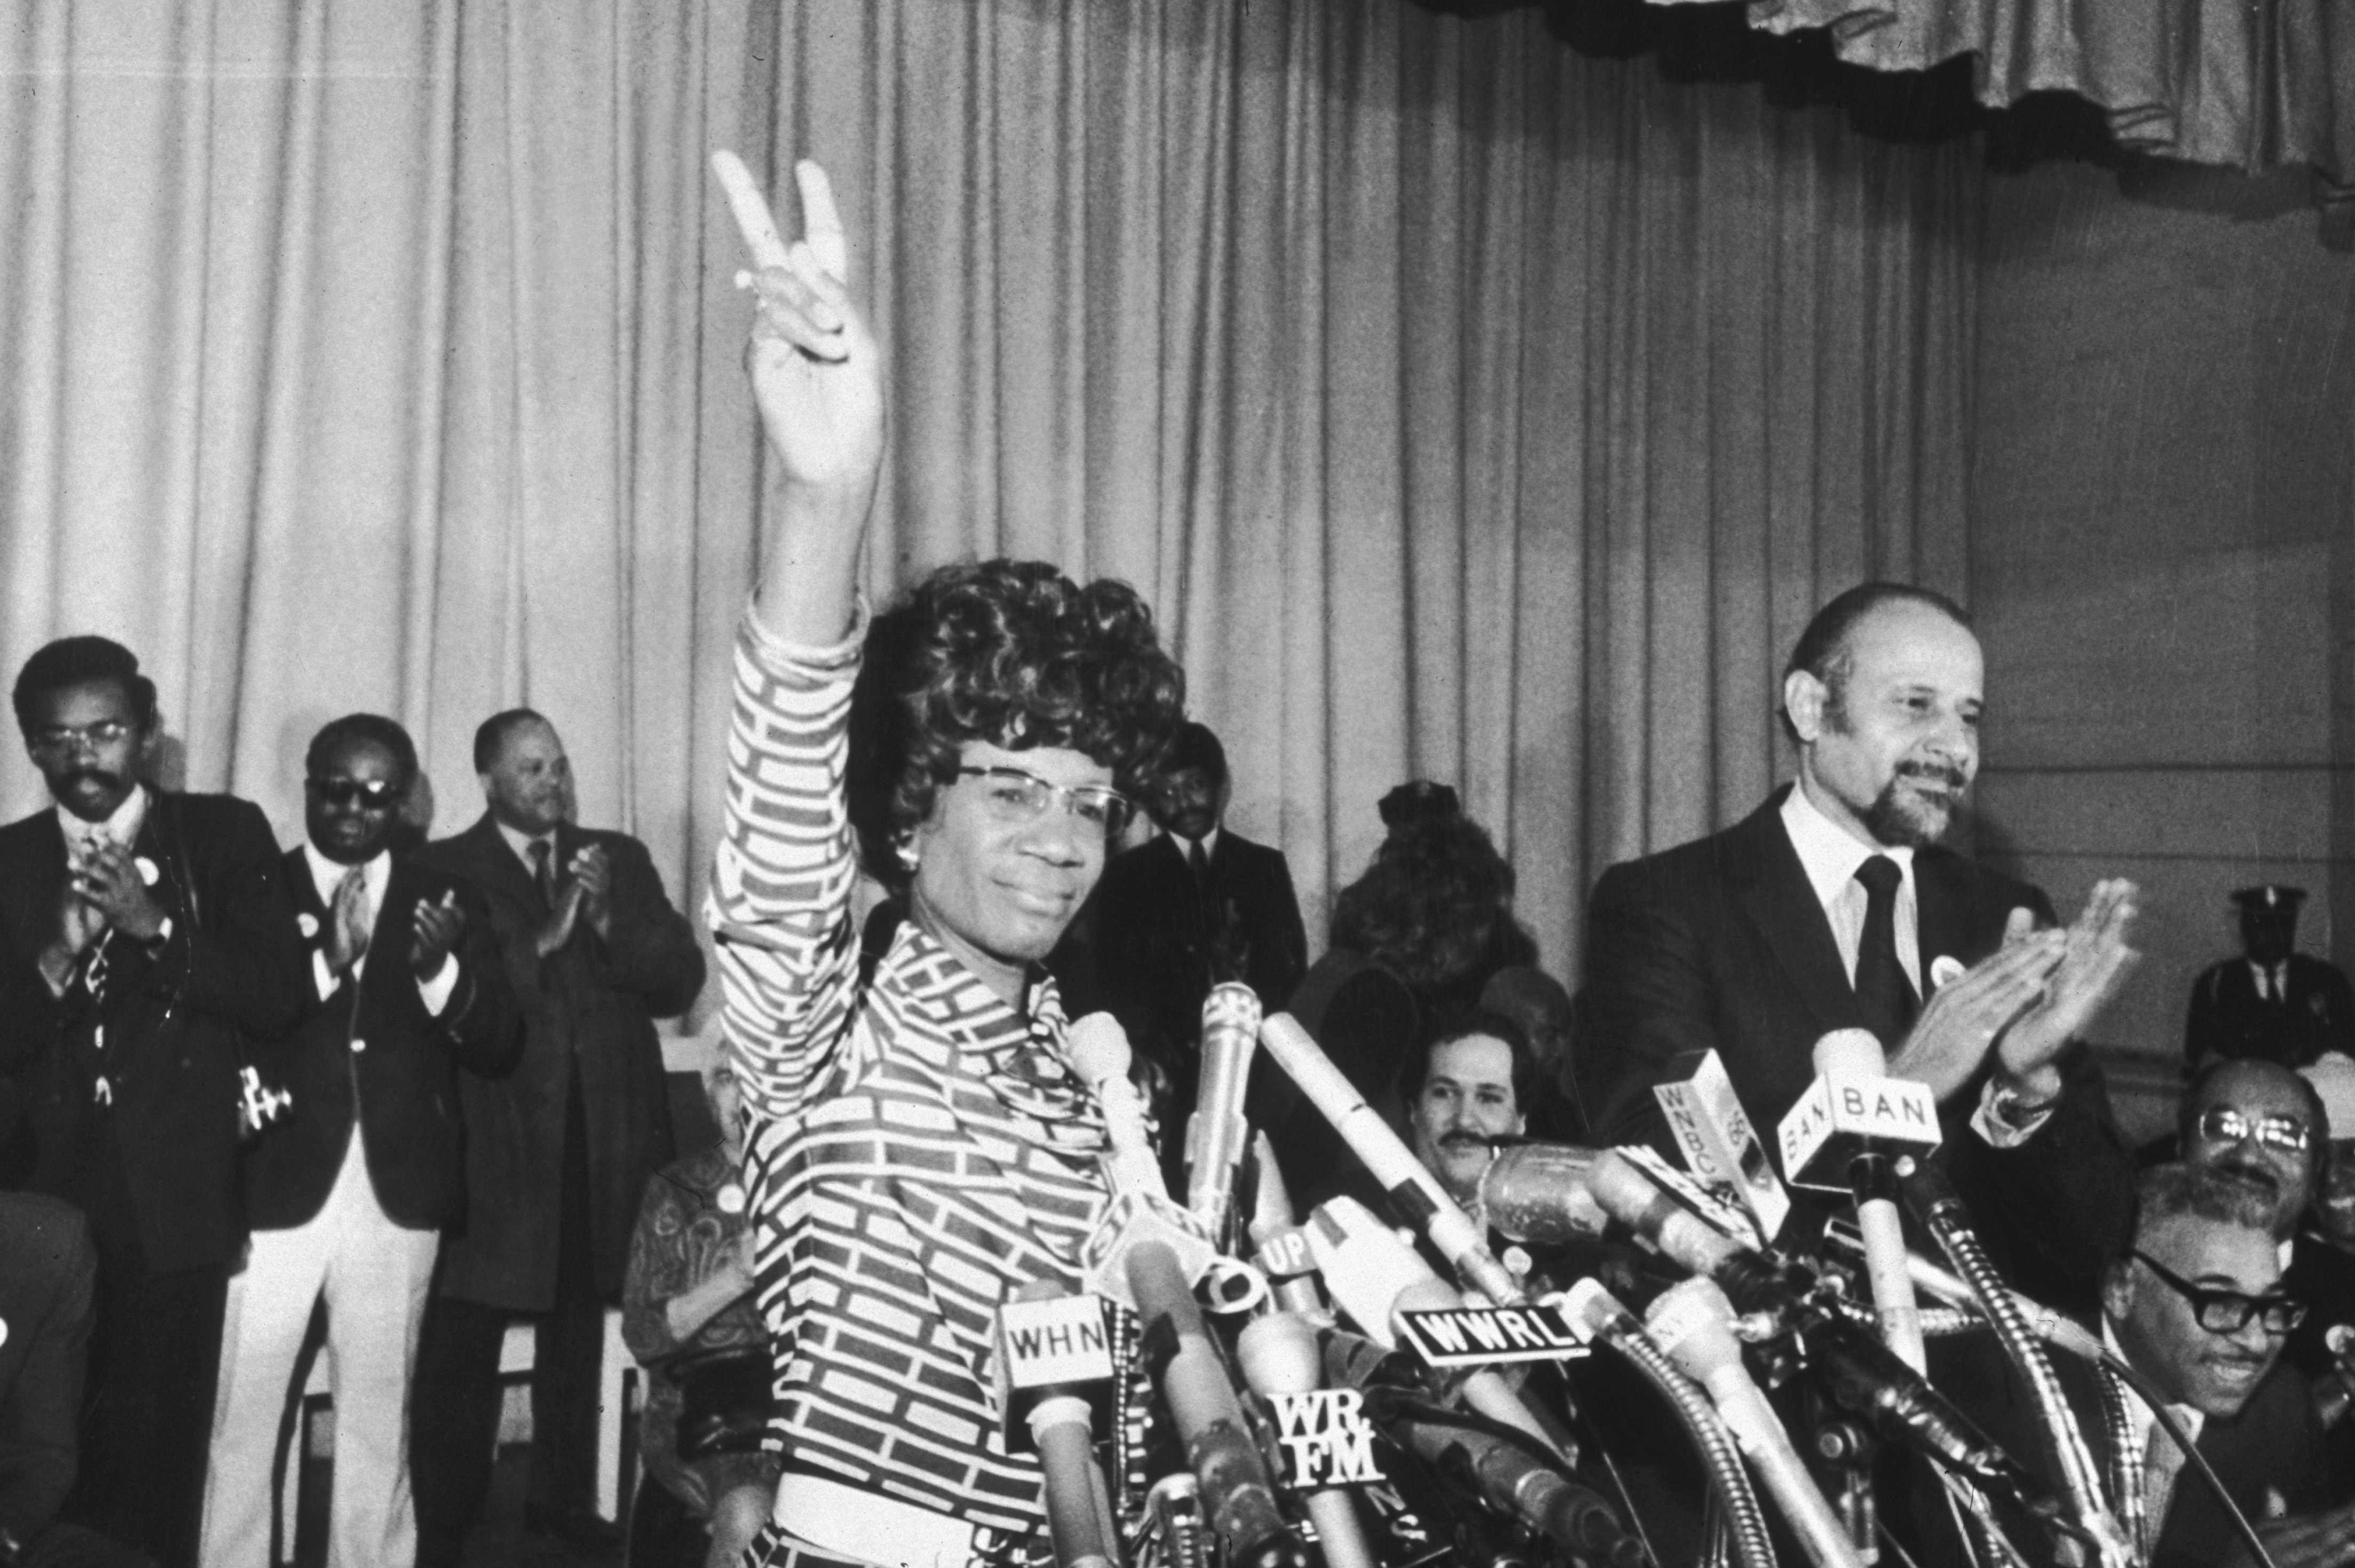 25th January 1972: US Representative Shirley Chisholm of Brooklyn announces her entry for Democratic nomination for the presidency, at the Concord Baptist Church in Brooklyn, New York. Manhattan borough president Percy Sutton applauds at right. (Photo by Don Hogan Charles/New York Times Co./Getty Images) (Getty Images)